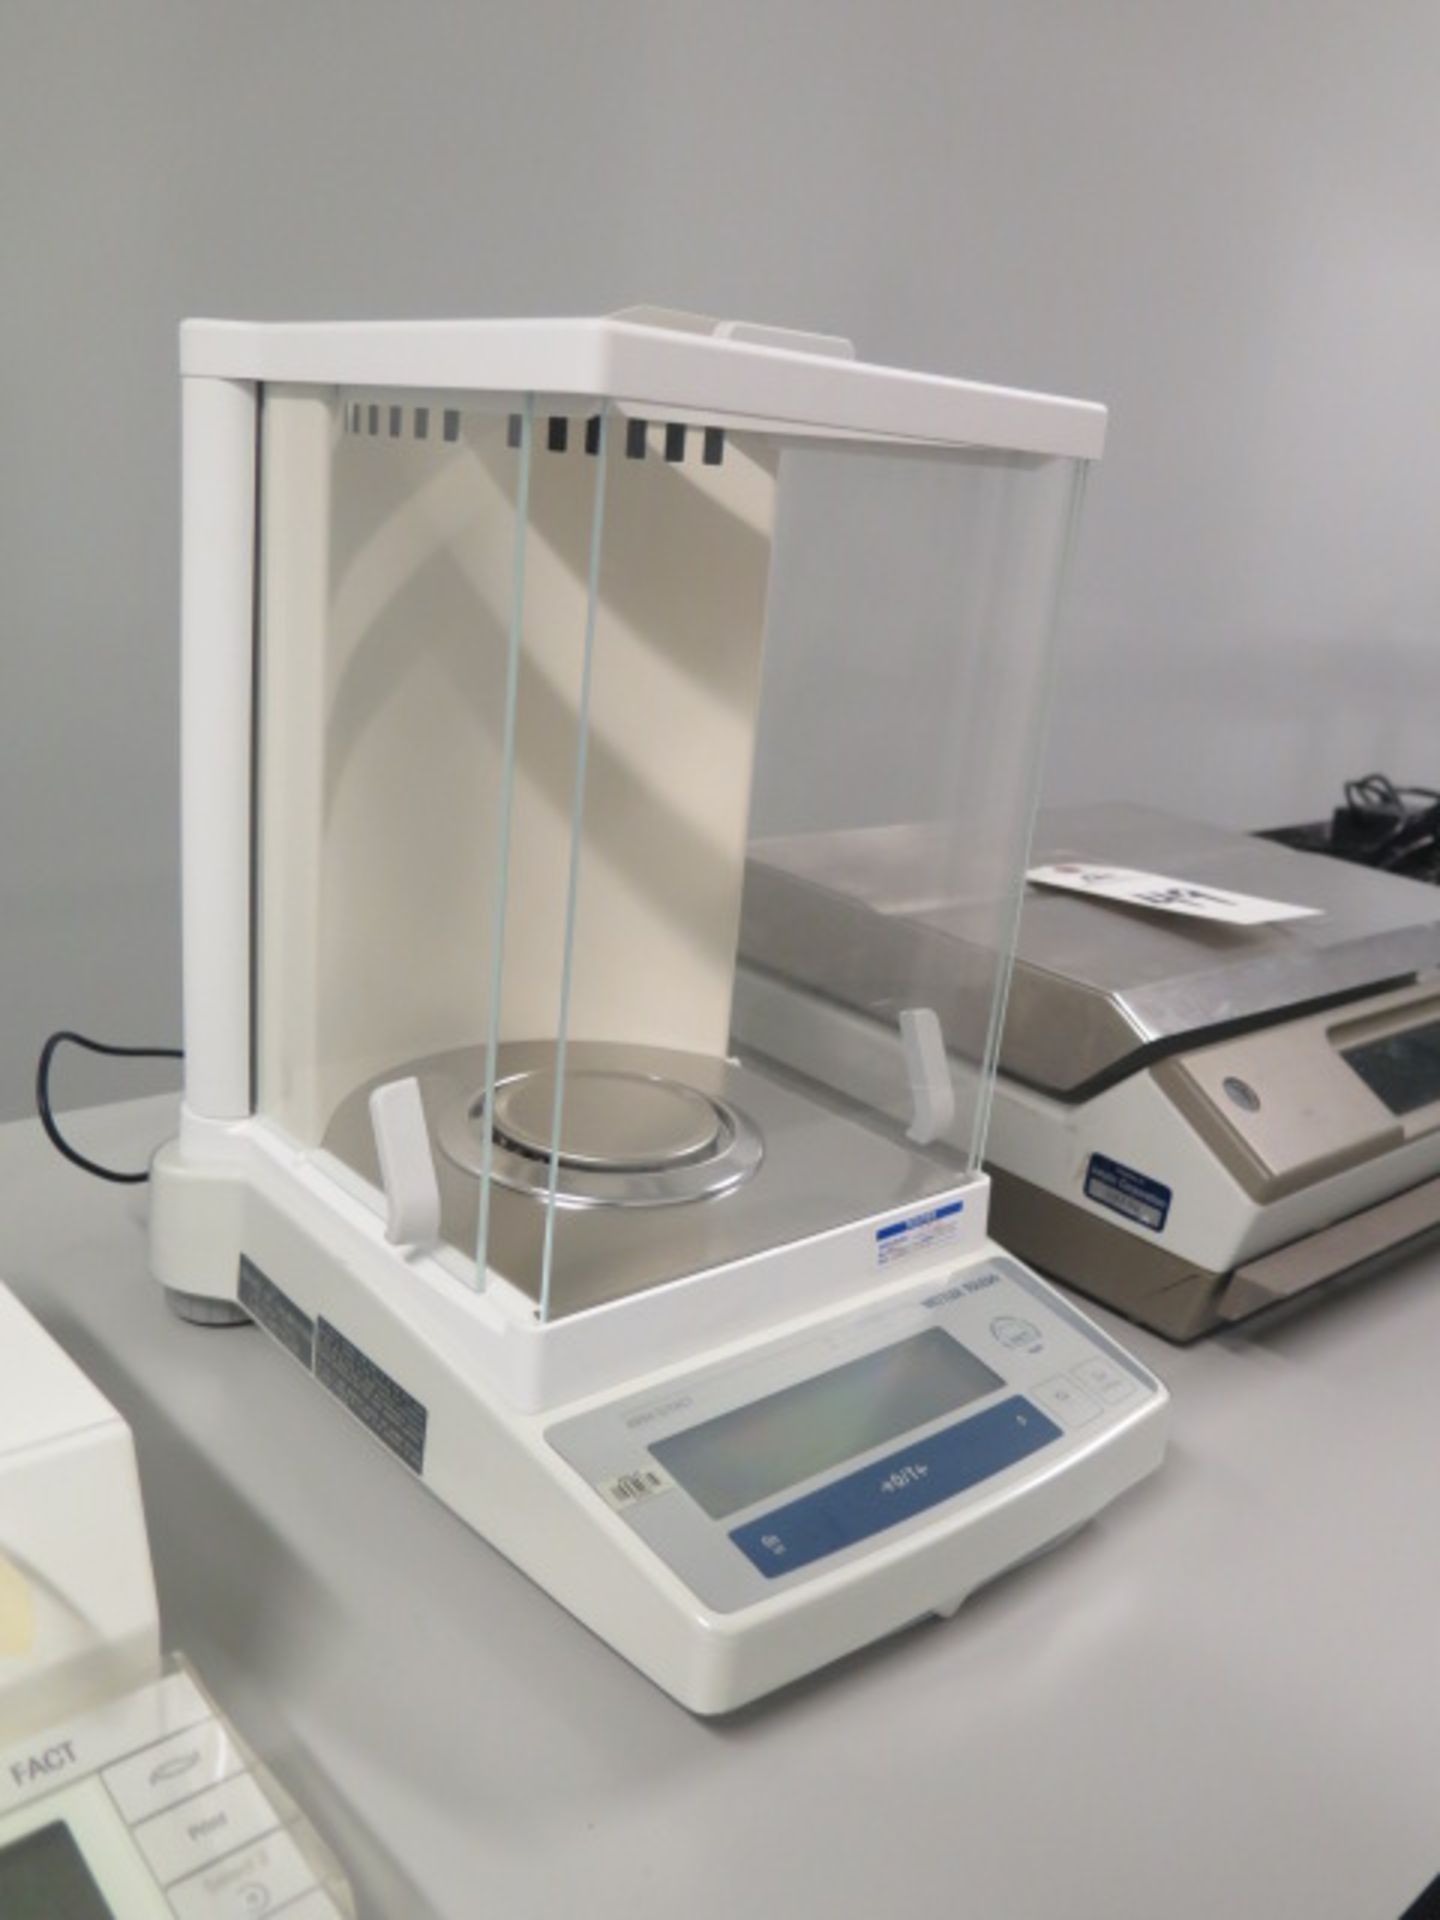 Mettler Toledo AB54-S/FACT Digital Analytical Balance Scale | Loading Price: Hand Carry or Contact - Image 2 of 4